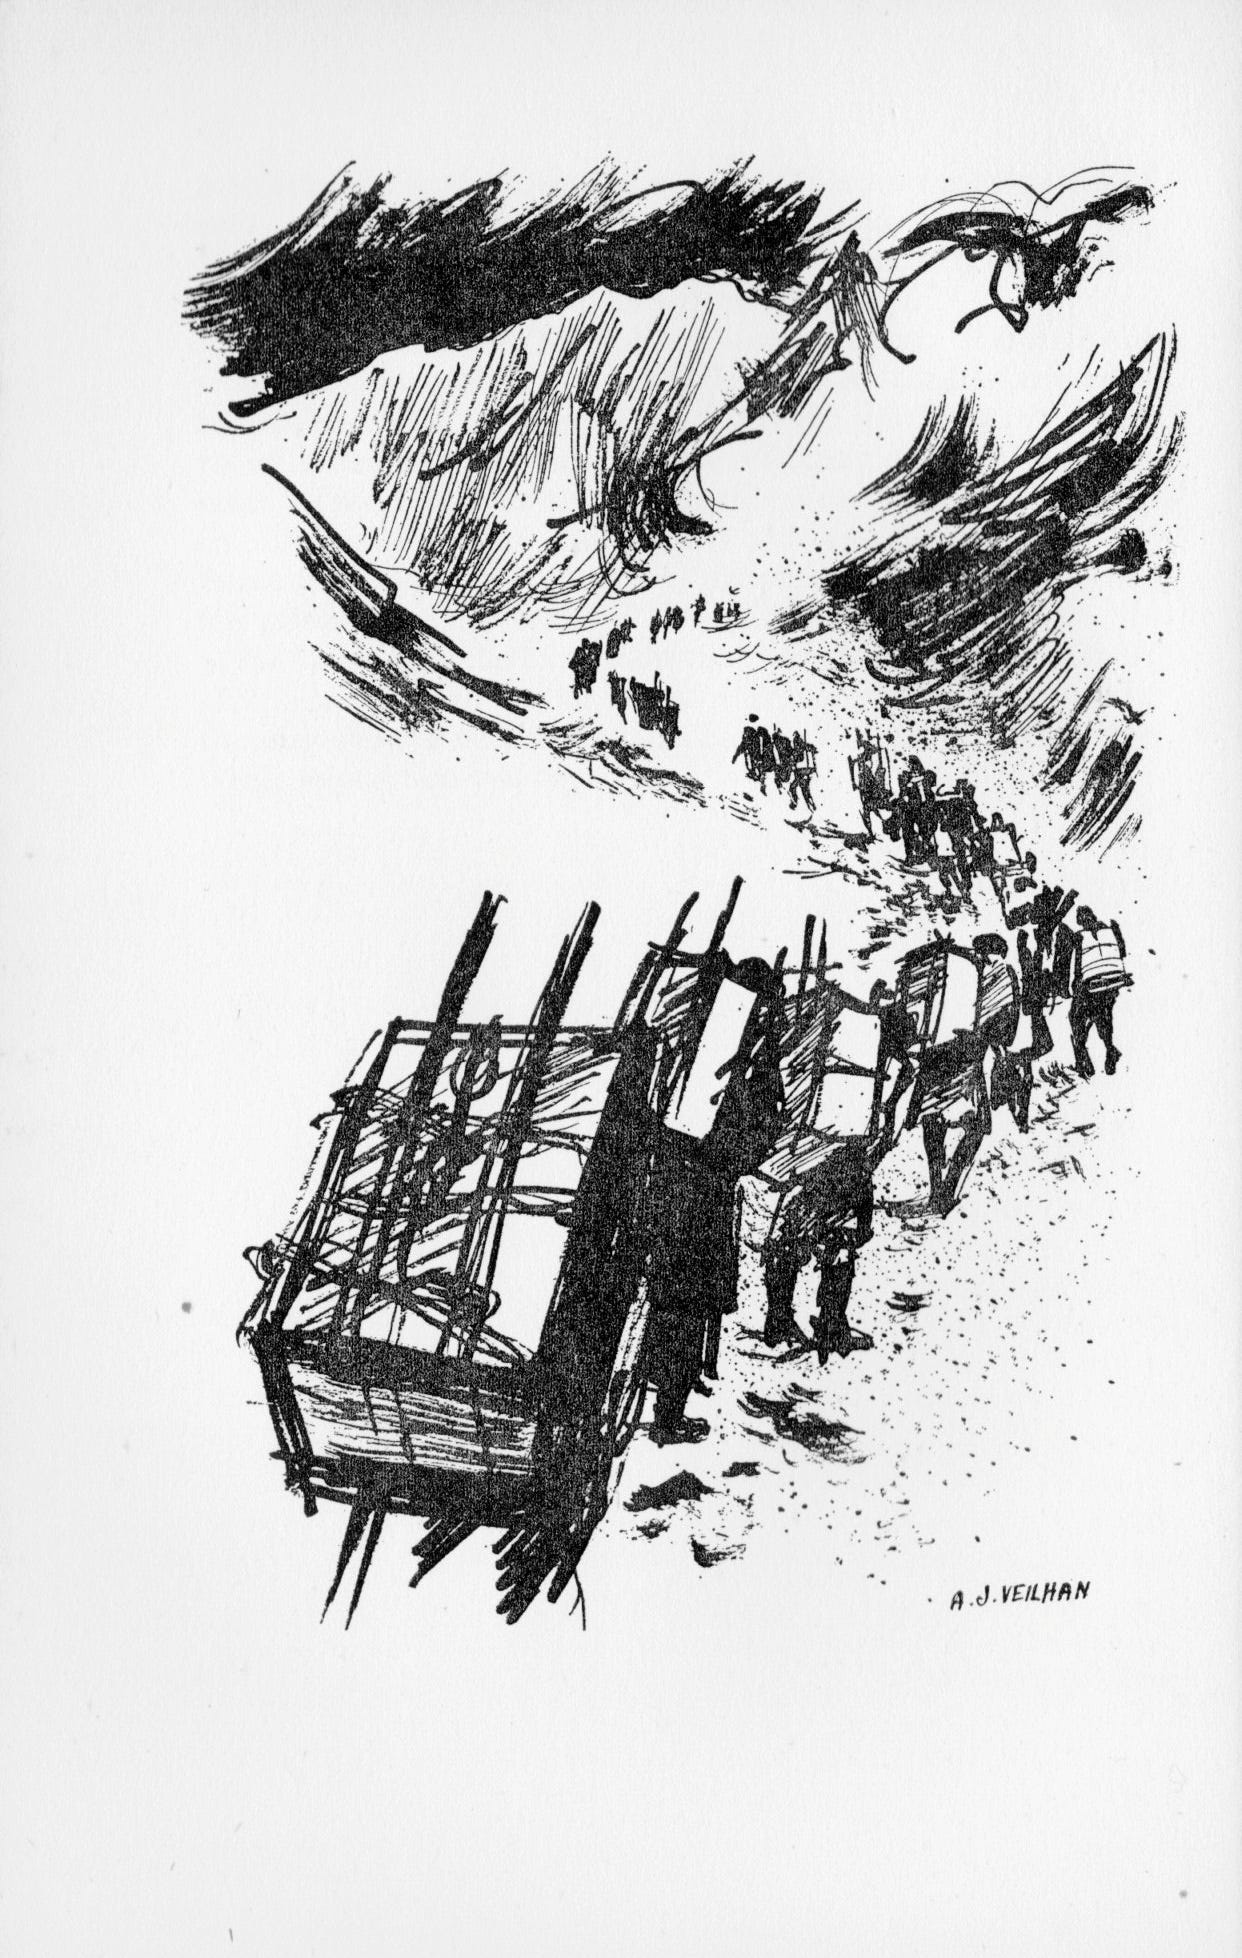 Porters heading to Everest. Illustration by AJ Veilhan from ‘South Col’ by Wilfrid Noyce